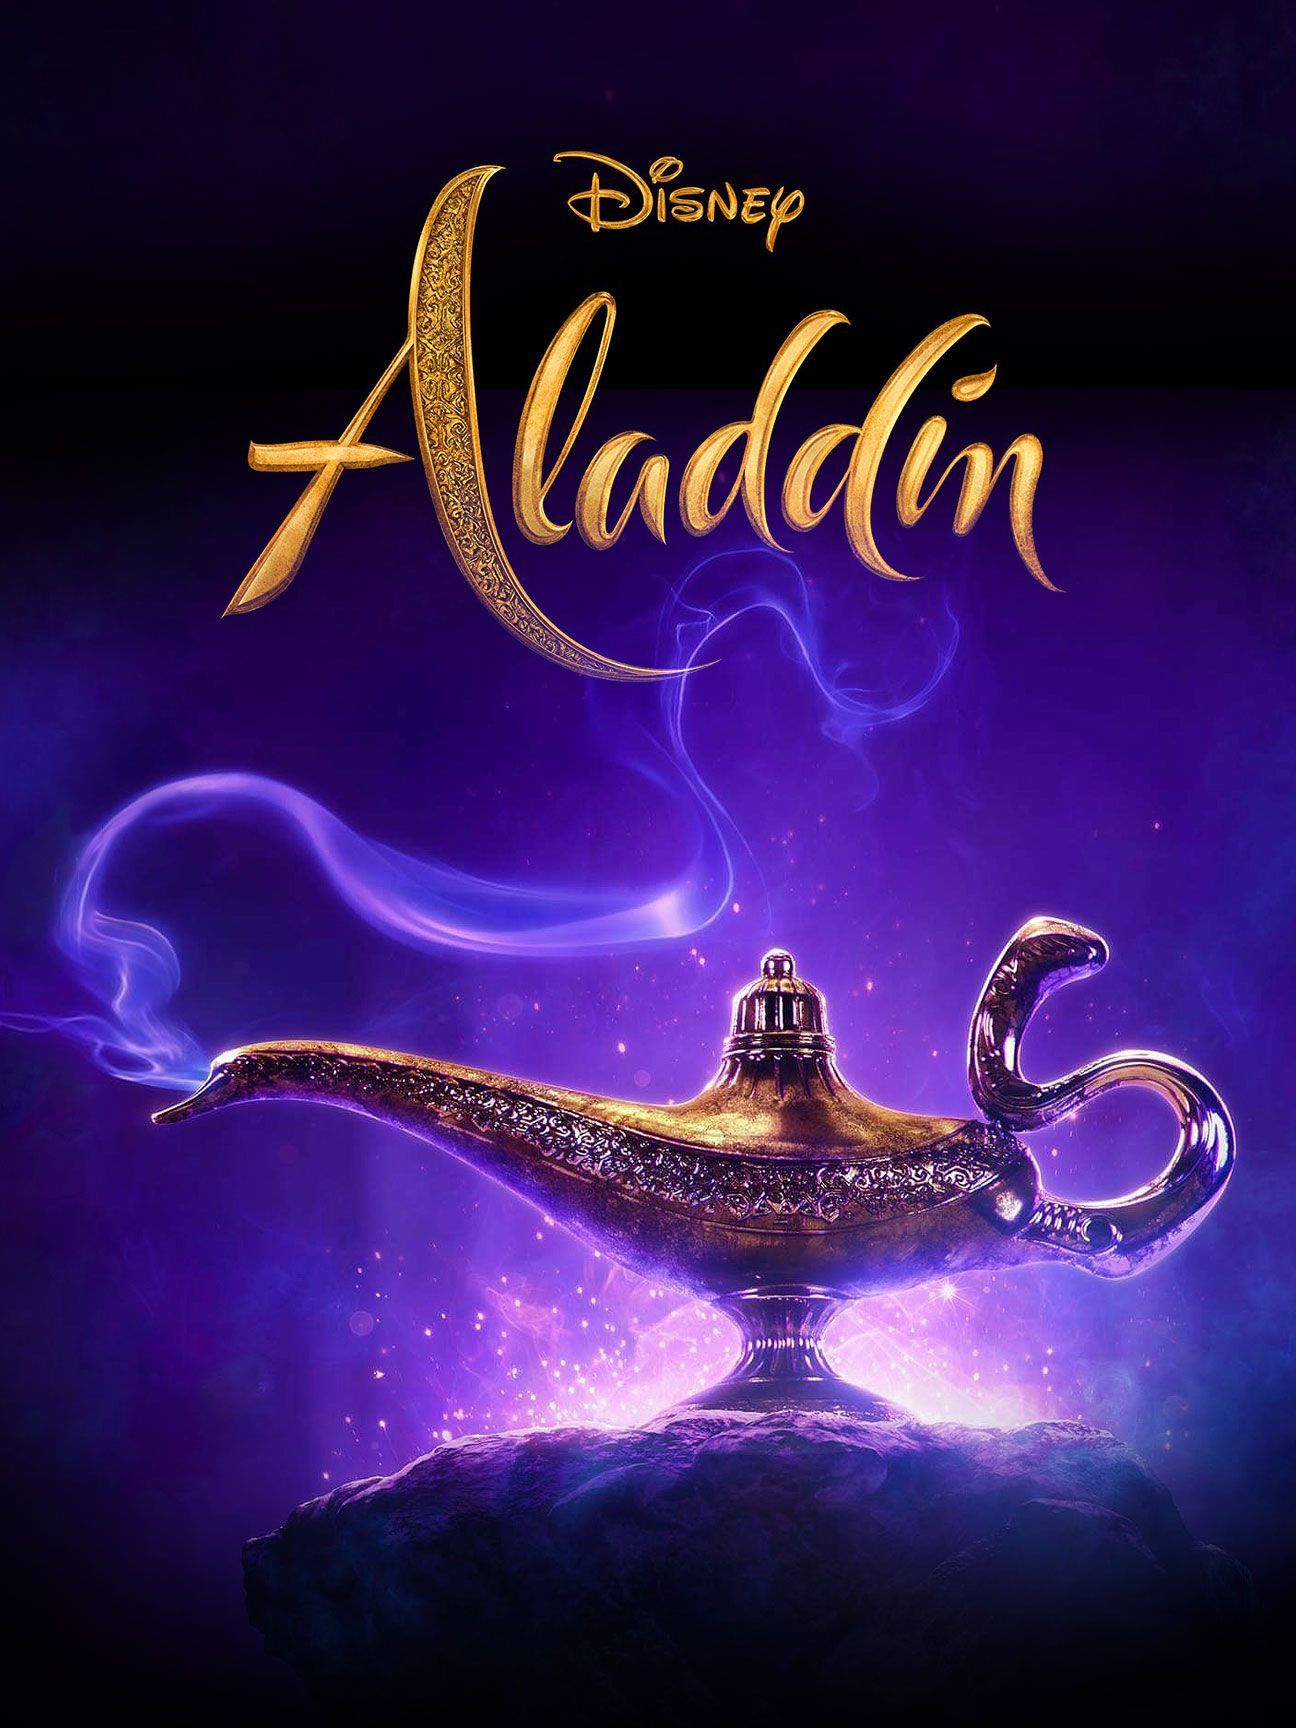 1700 Aladdin Lamp Stock Photos Pictures  RoyaltyFree Images  iStock  Aladdin  lamp vector